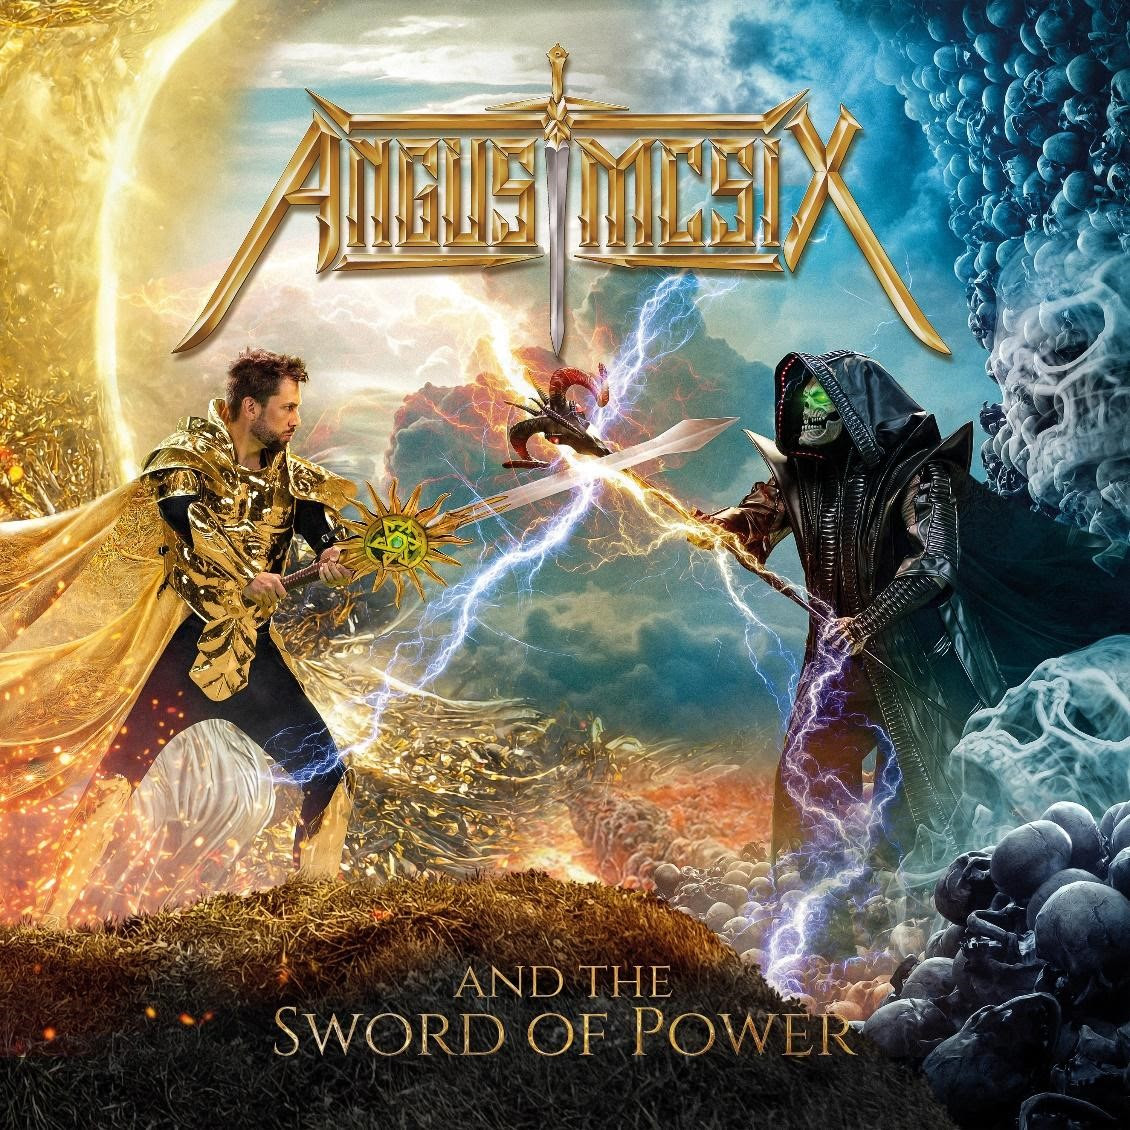 ALBUM REVIEW: Angus McSix and the Sword of Power by Angus McSix